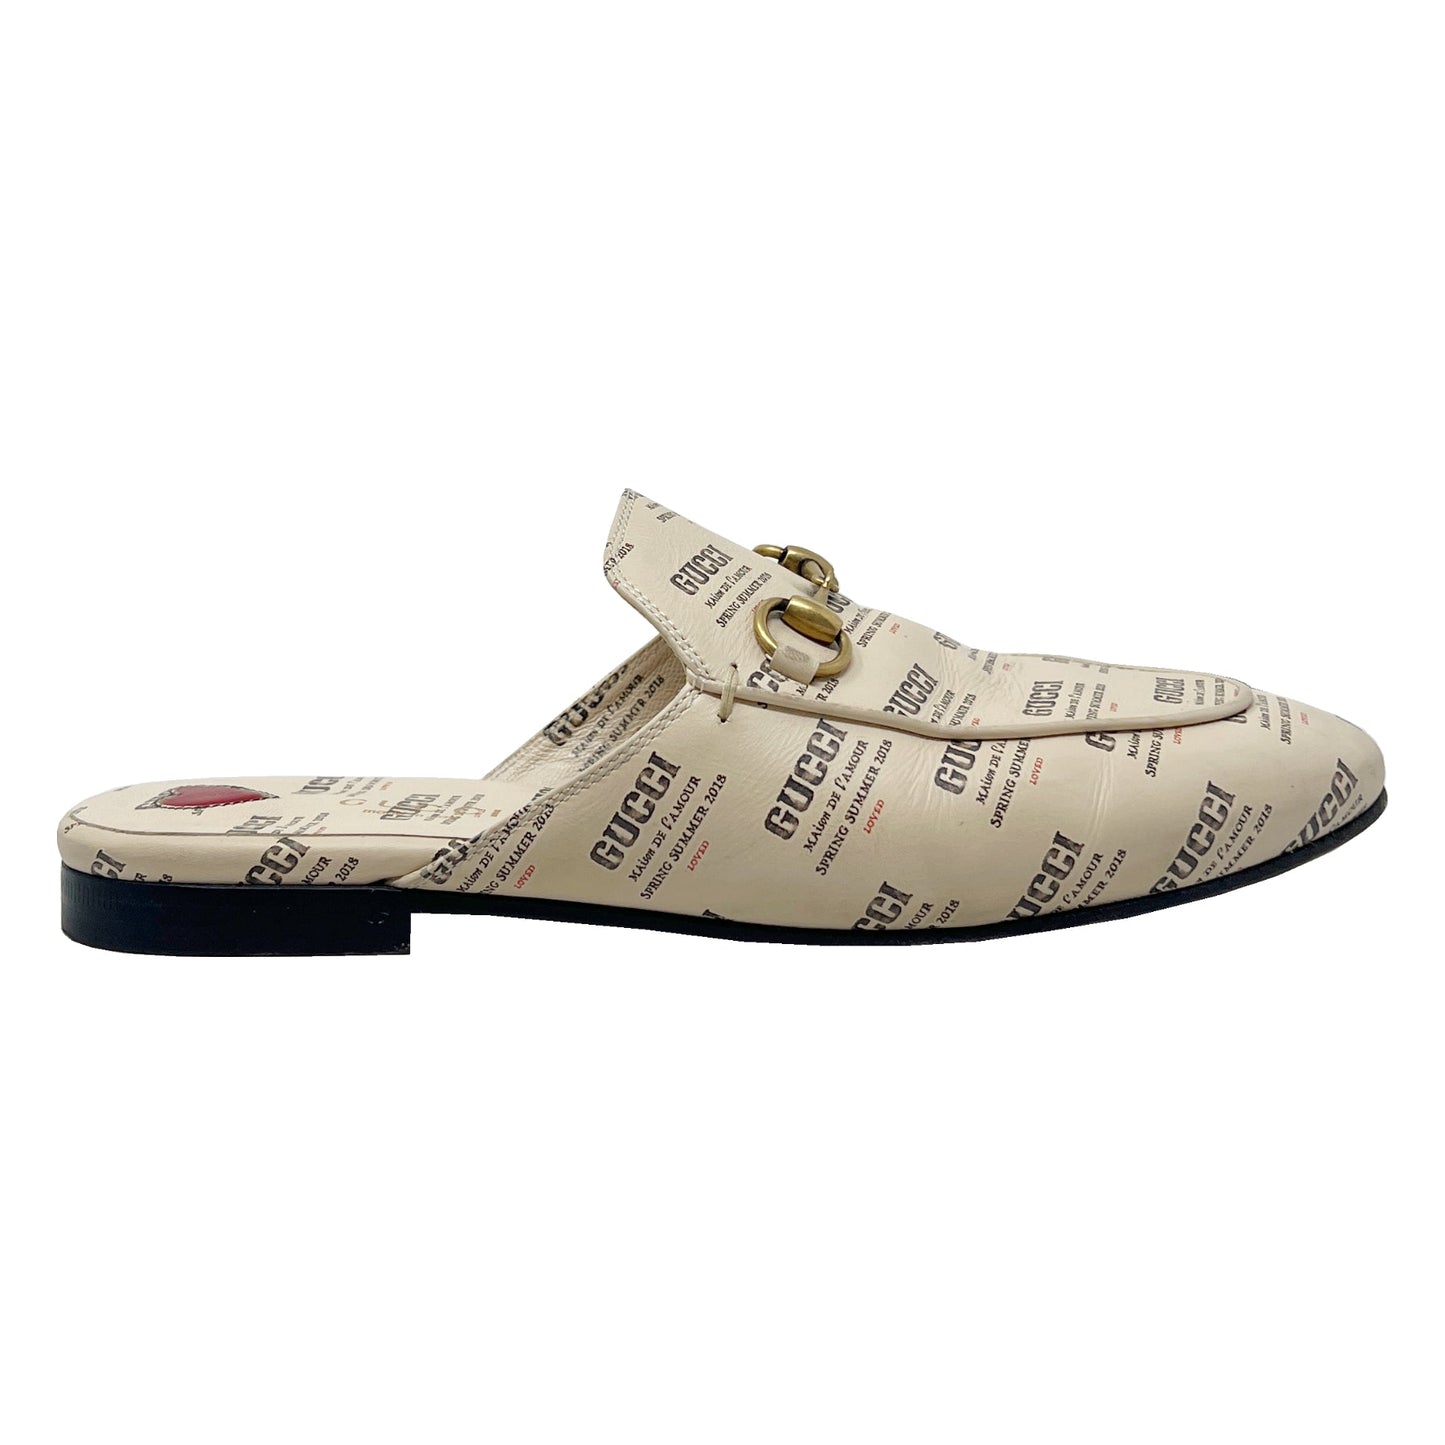 Gucci Shoes Princetown Beige Leather Stamped Logo Limited Edition Loafer Flats